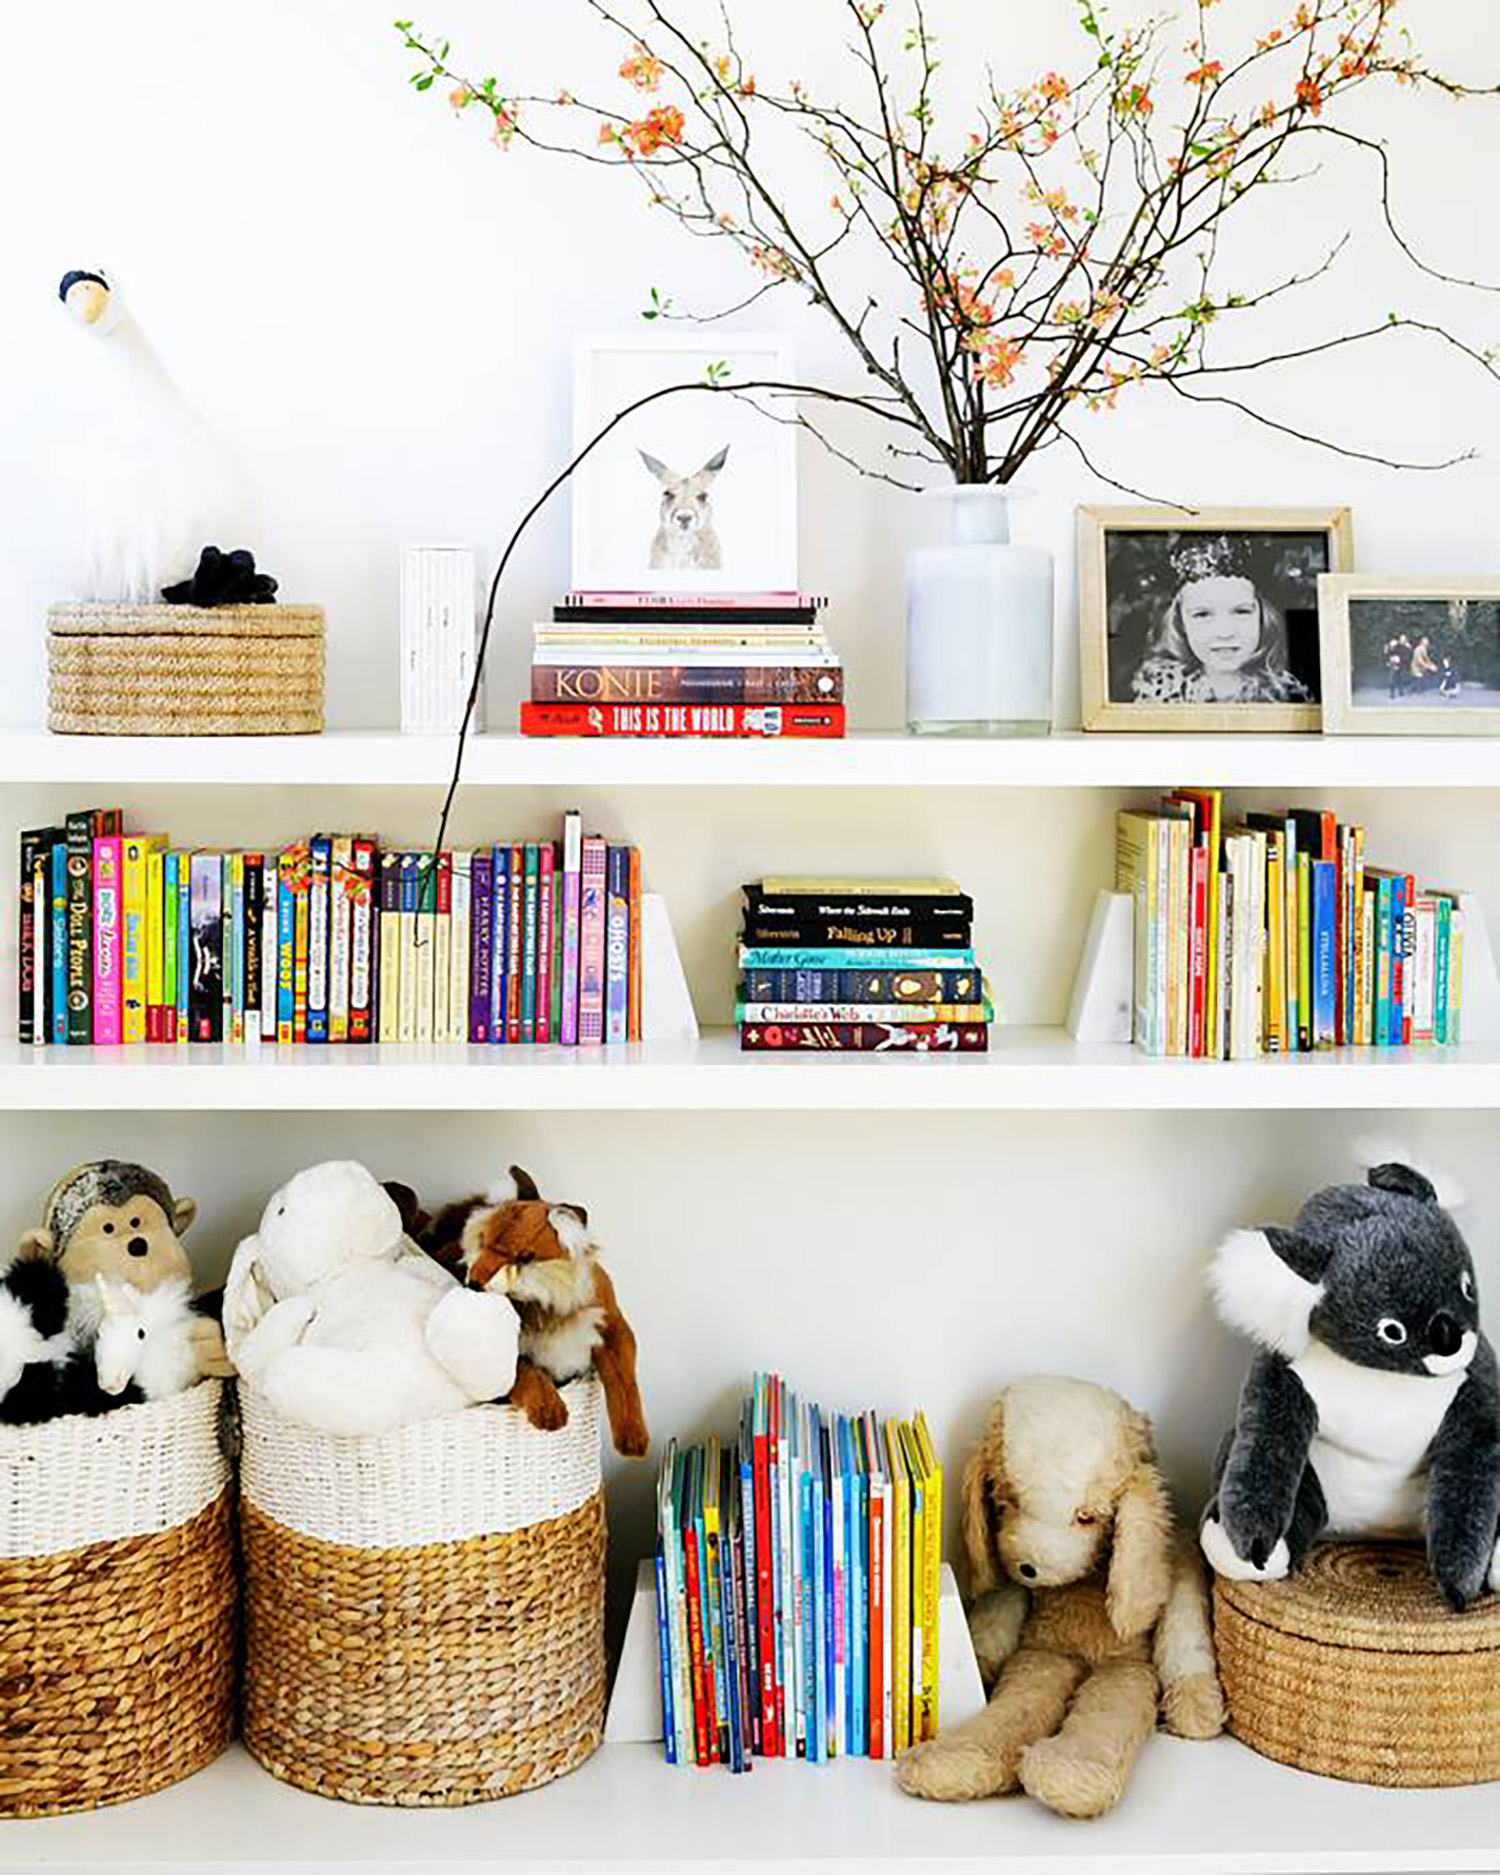 Shelves with childrens books and toys